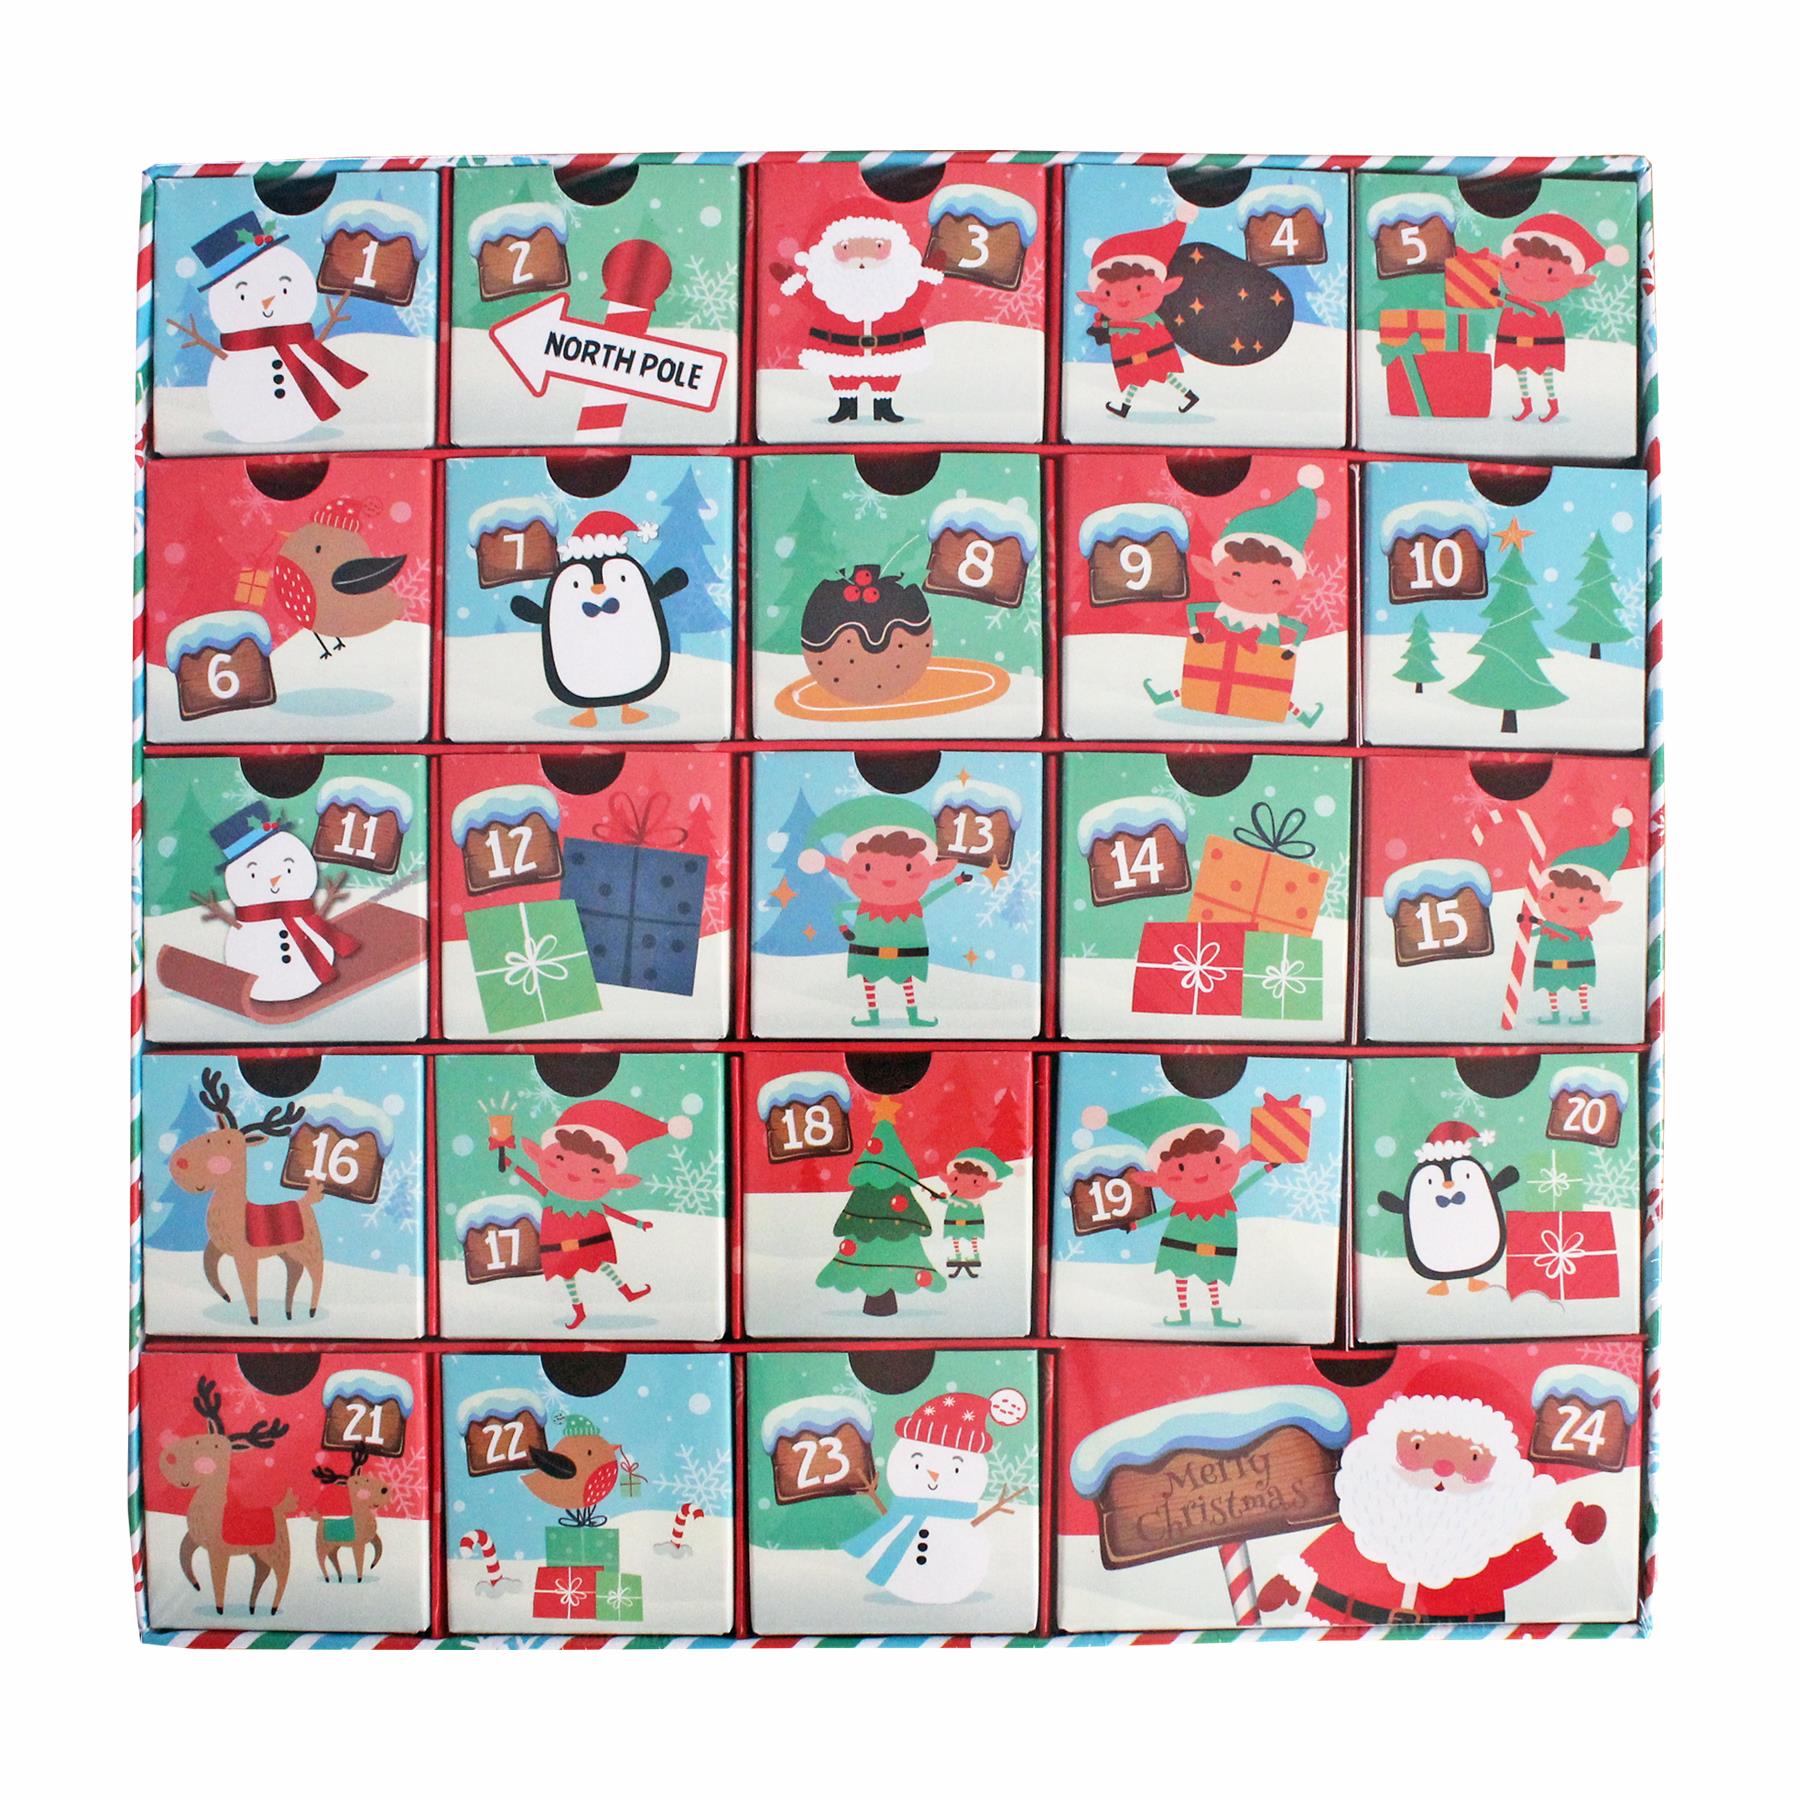 Christmas Advent Calendar - 24 Drawers - Add your own Treats